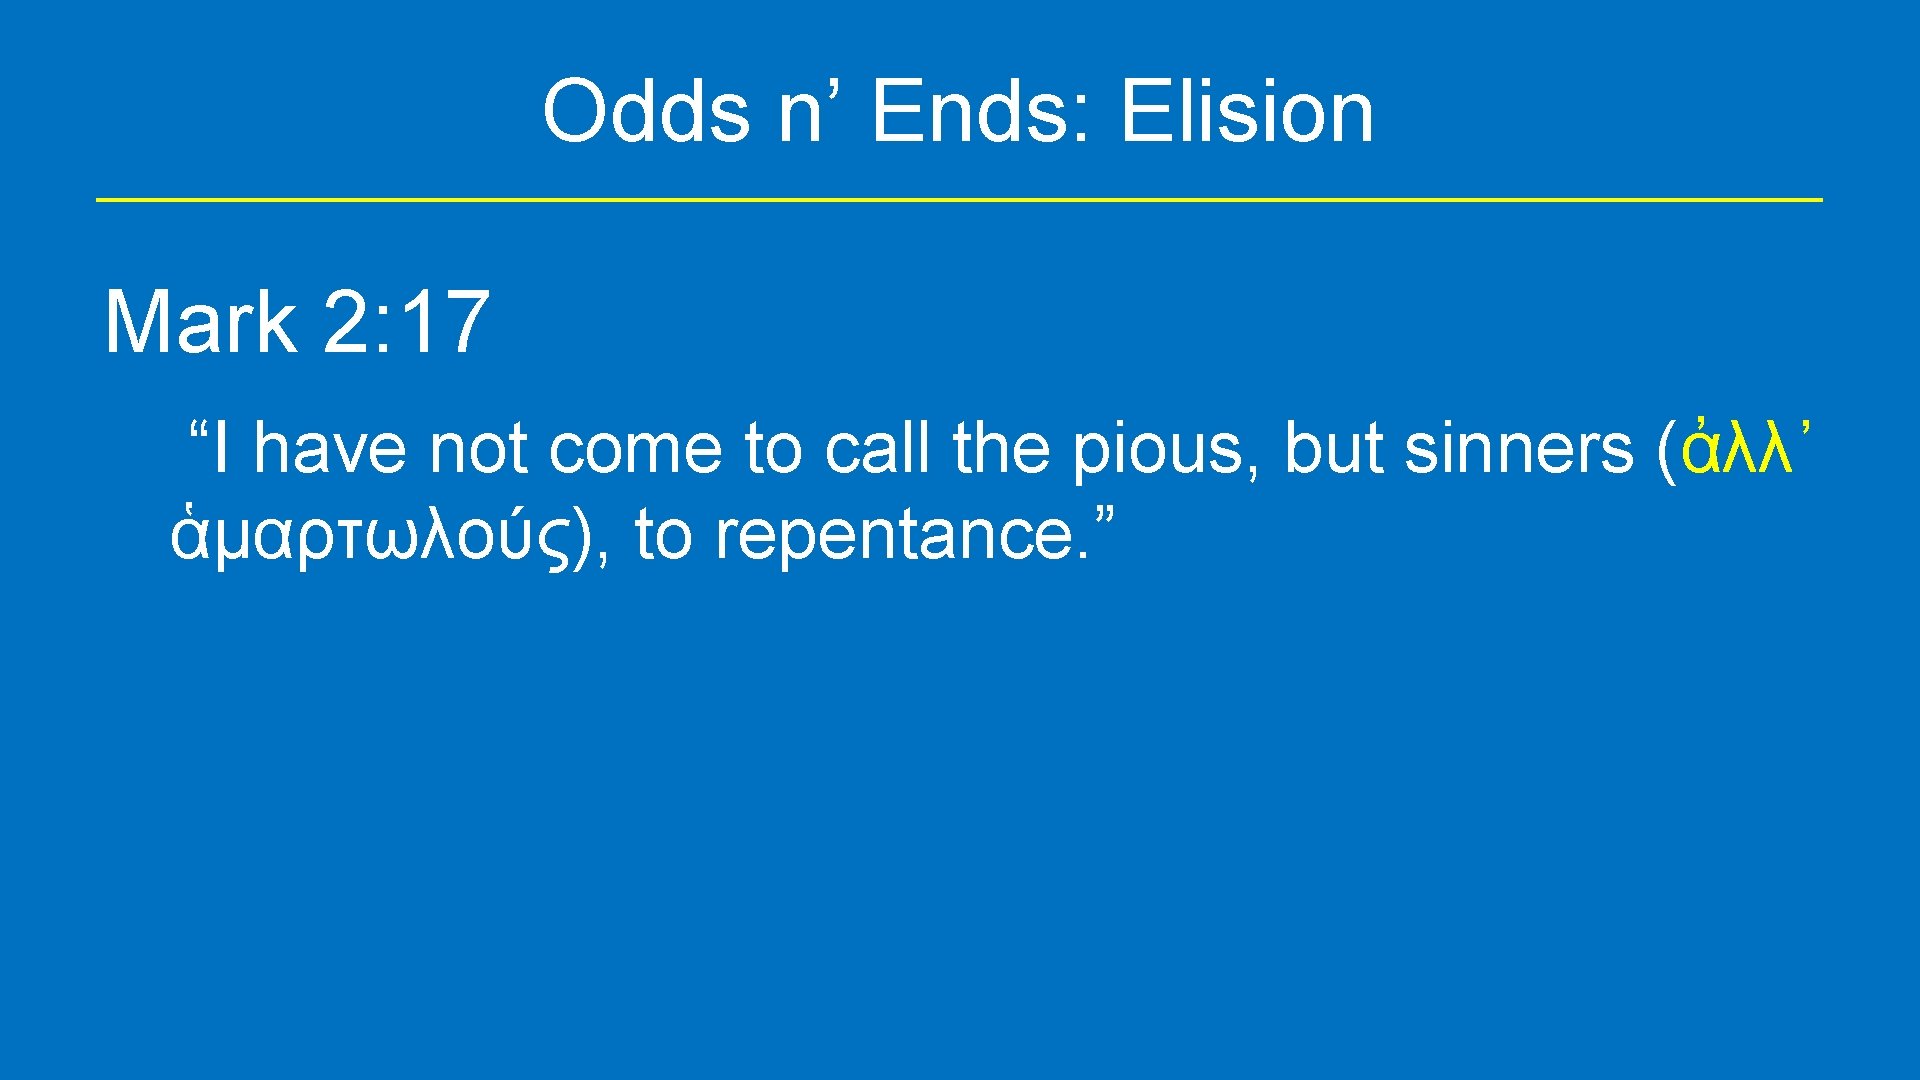 Odds n’ Ends: Elision Mark 2: 17 “I have not come to call the